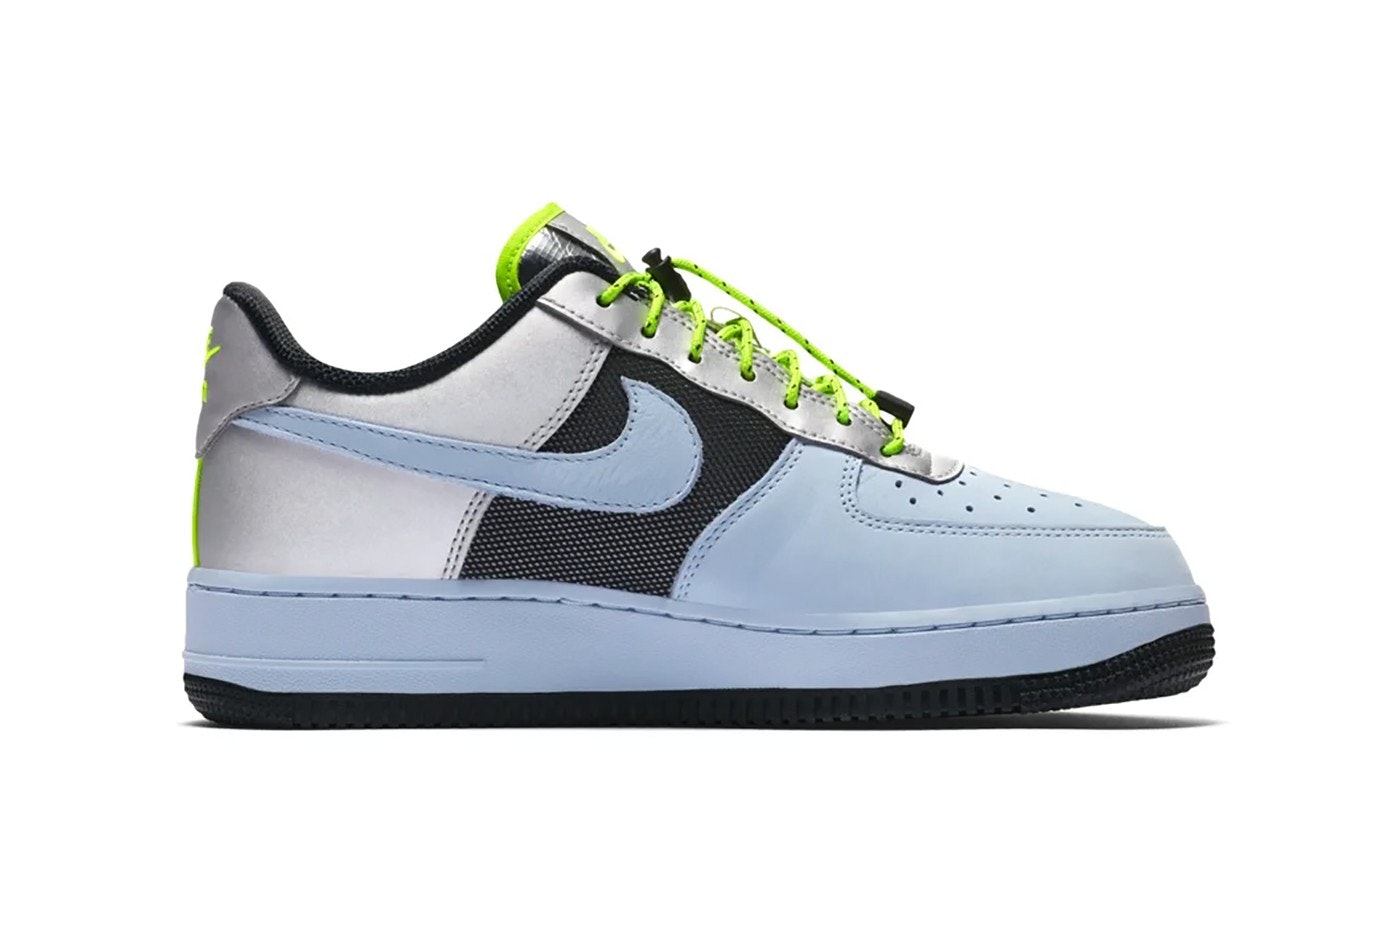 Nike Air Force 1 Low Wmns "Birds of the Night"